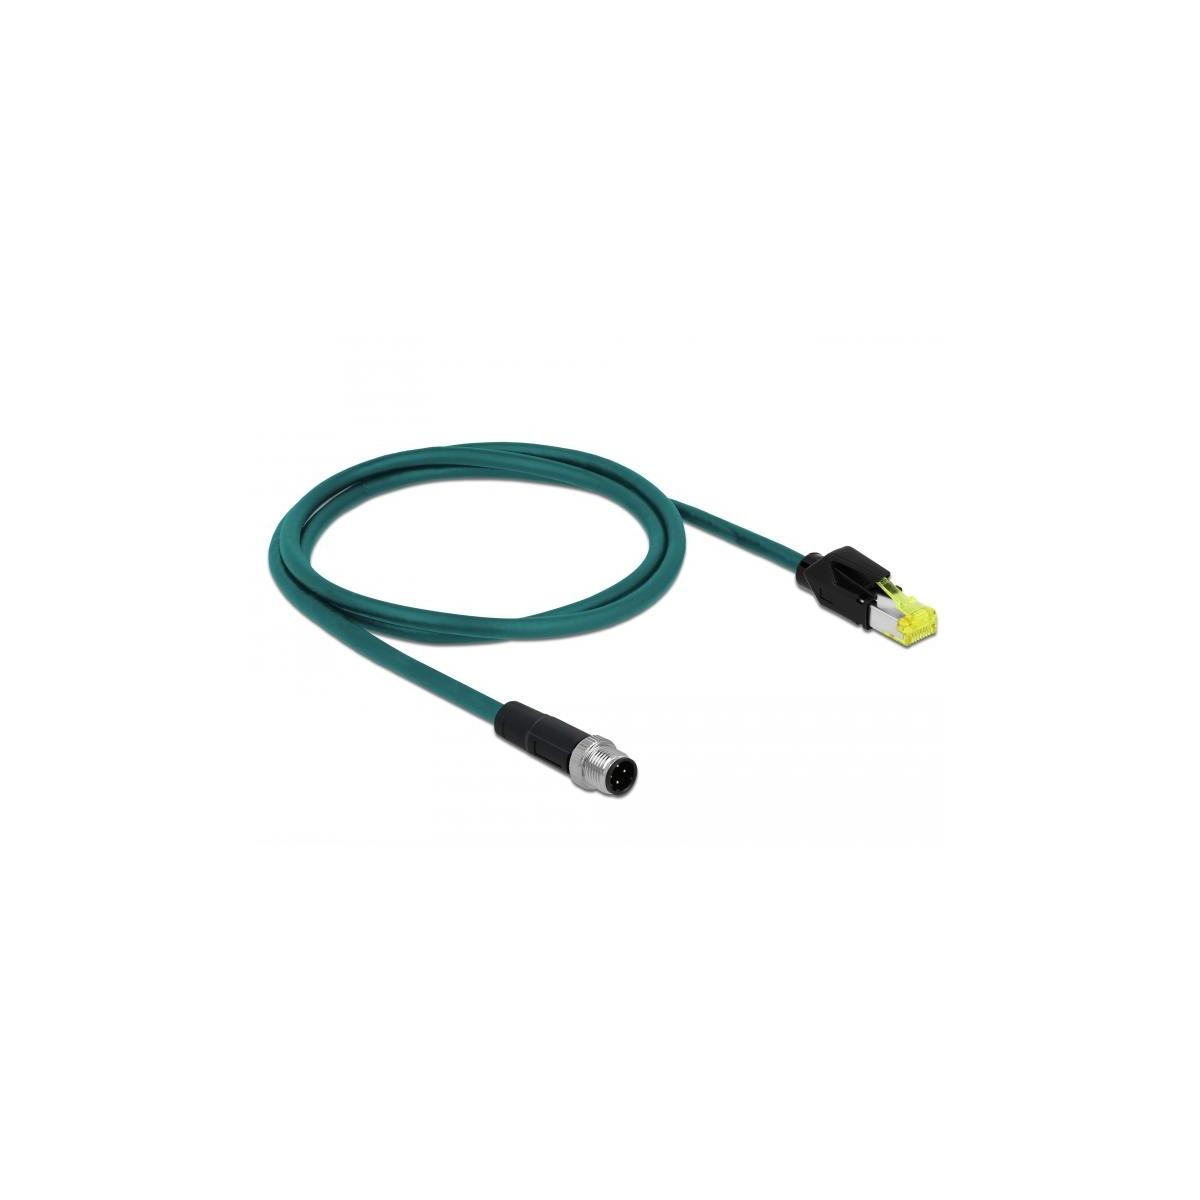 DELOCK 85442 Patchcable Cat.6a, Türkis